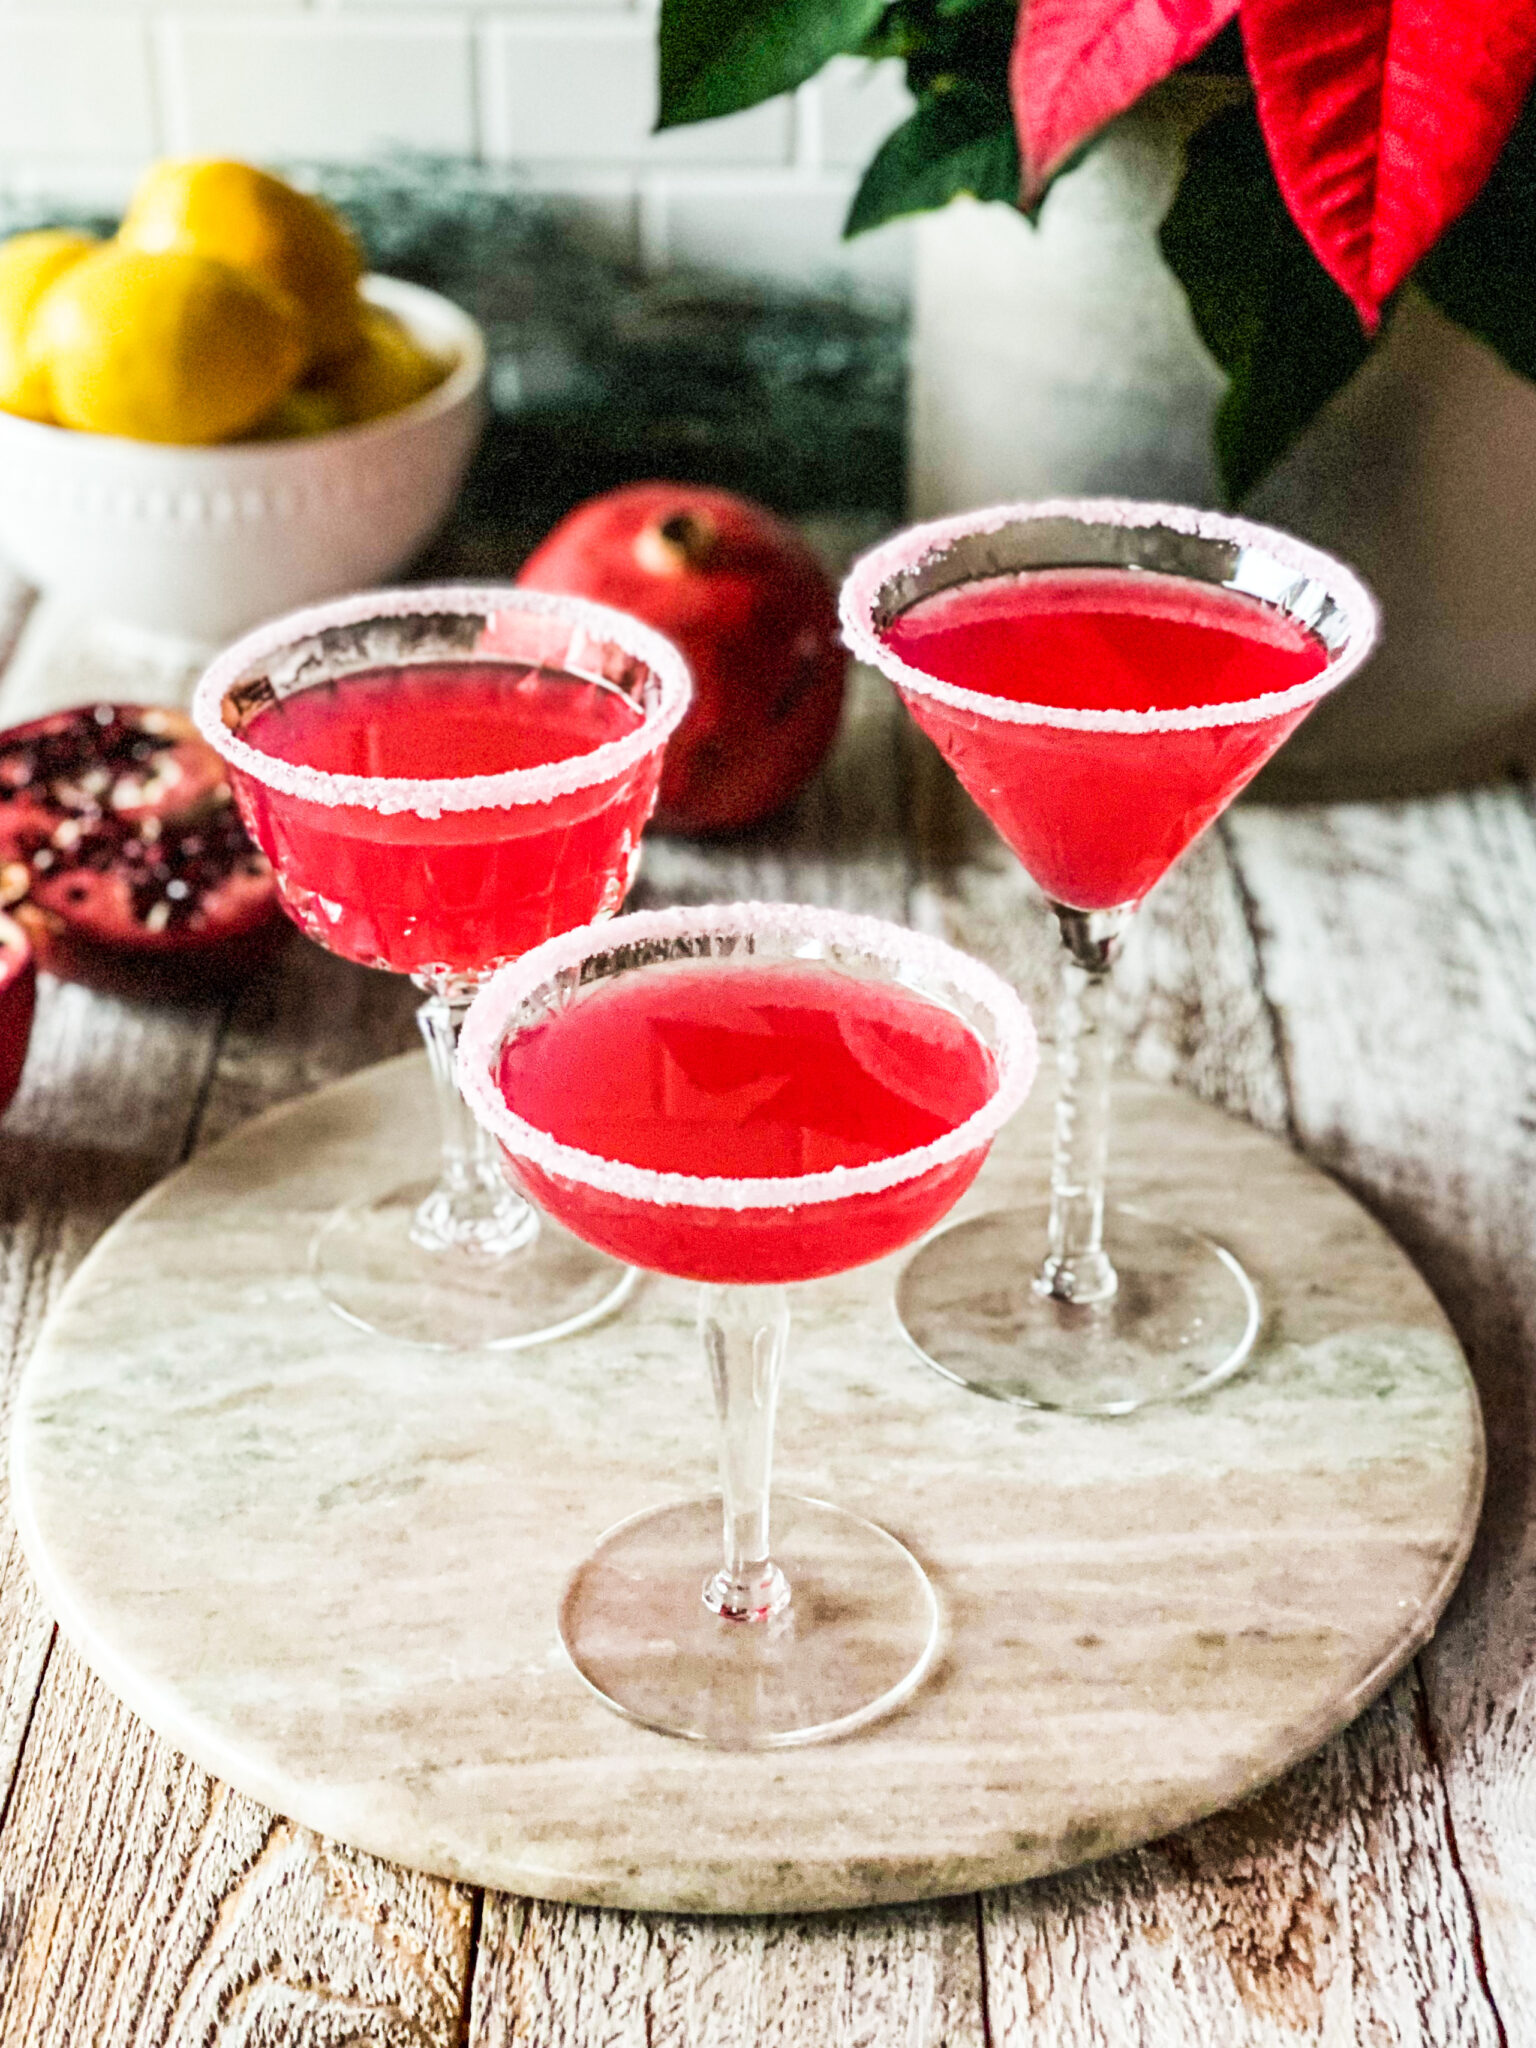 3 pomegranate lemon drop martinis with sugar dusted glasses